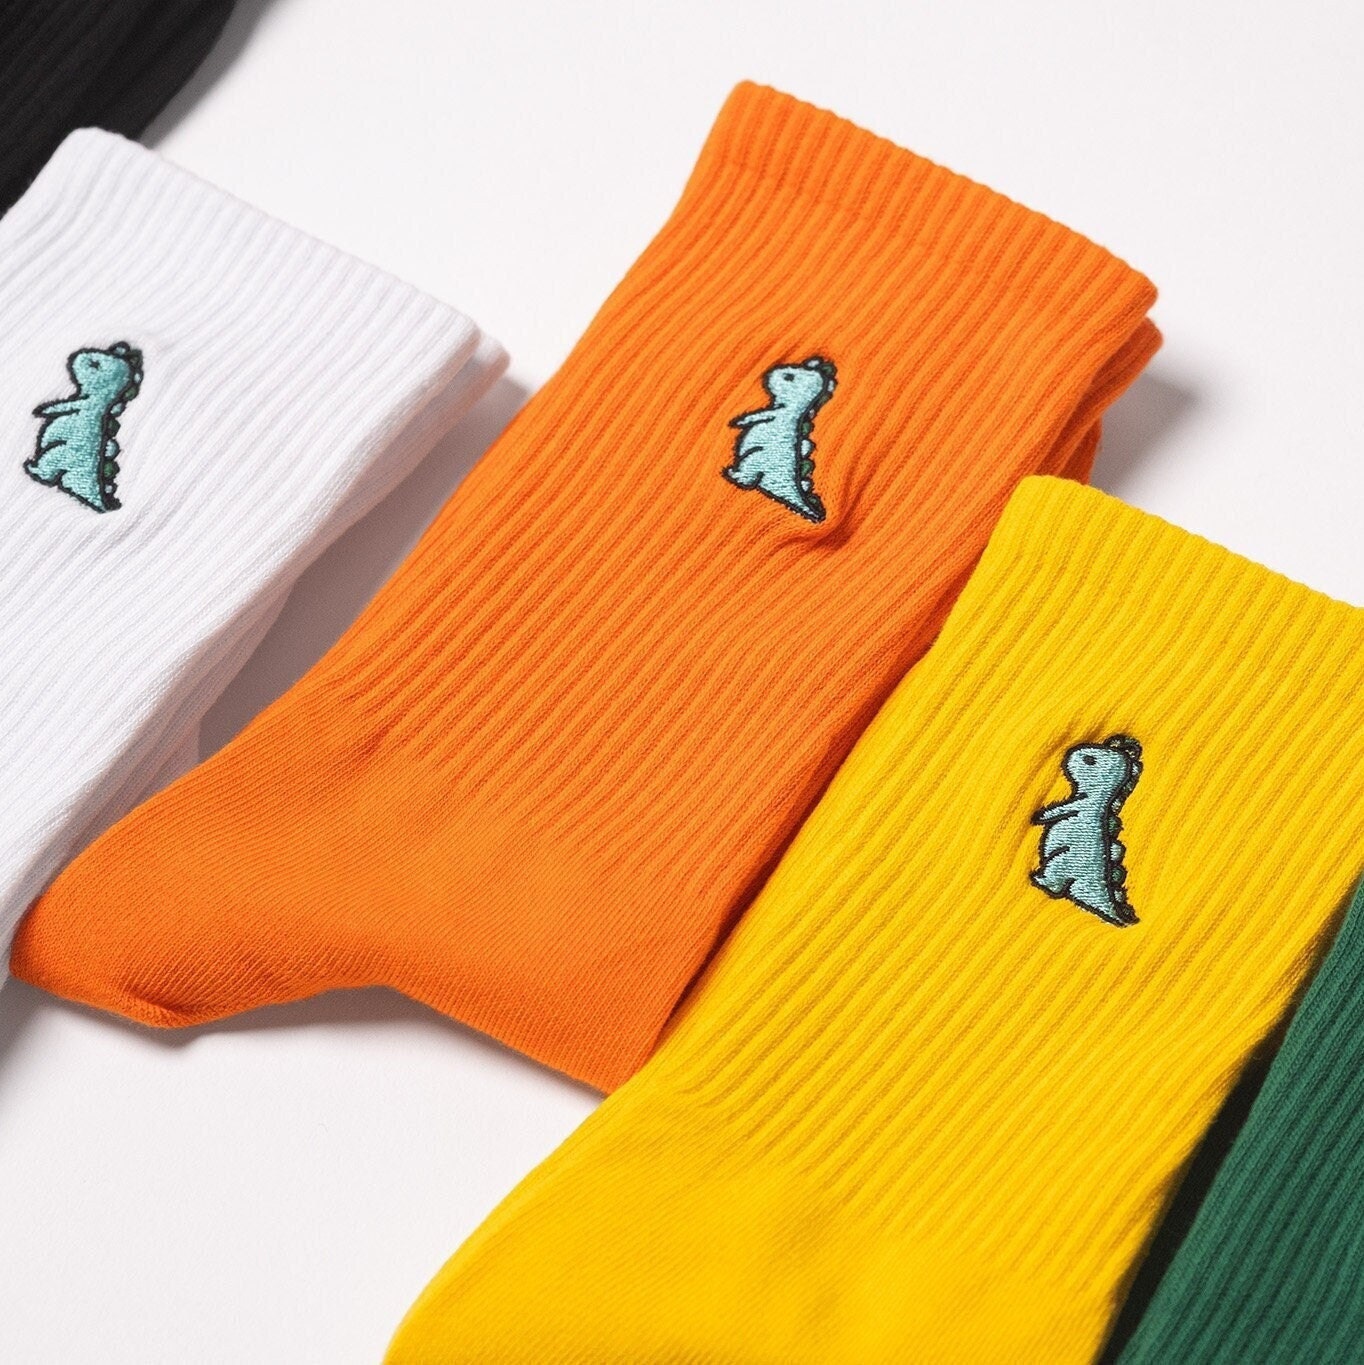 Embroidered Dino Socks - Unisex Cotton Crew UK Happy, Cute, Stylish Embroidery Dinosaur Sock Great Gift Idea For Him Her Friends